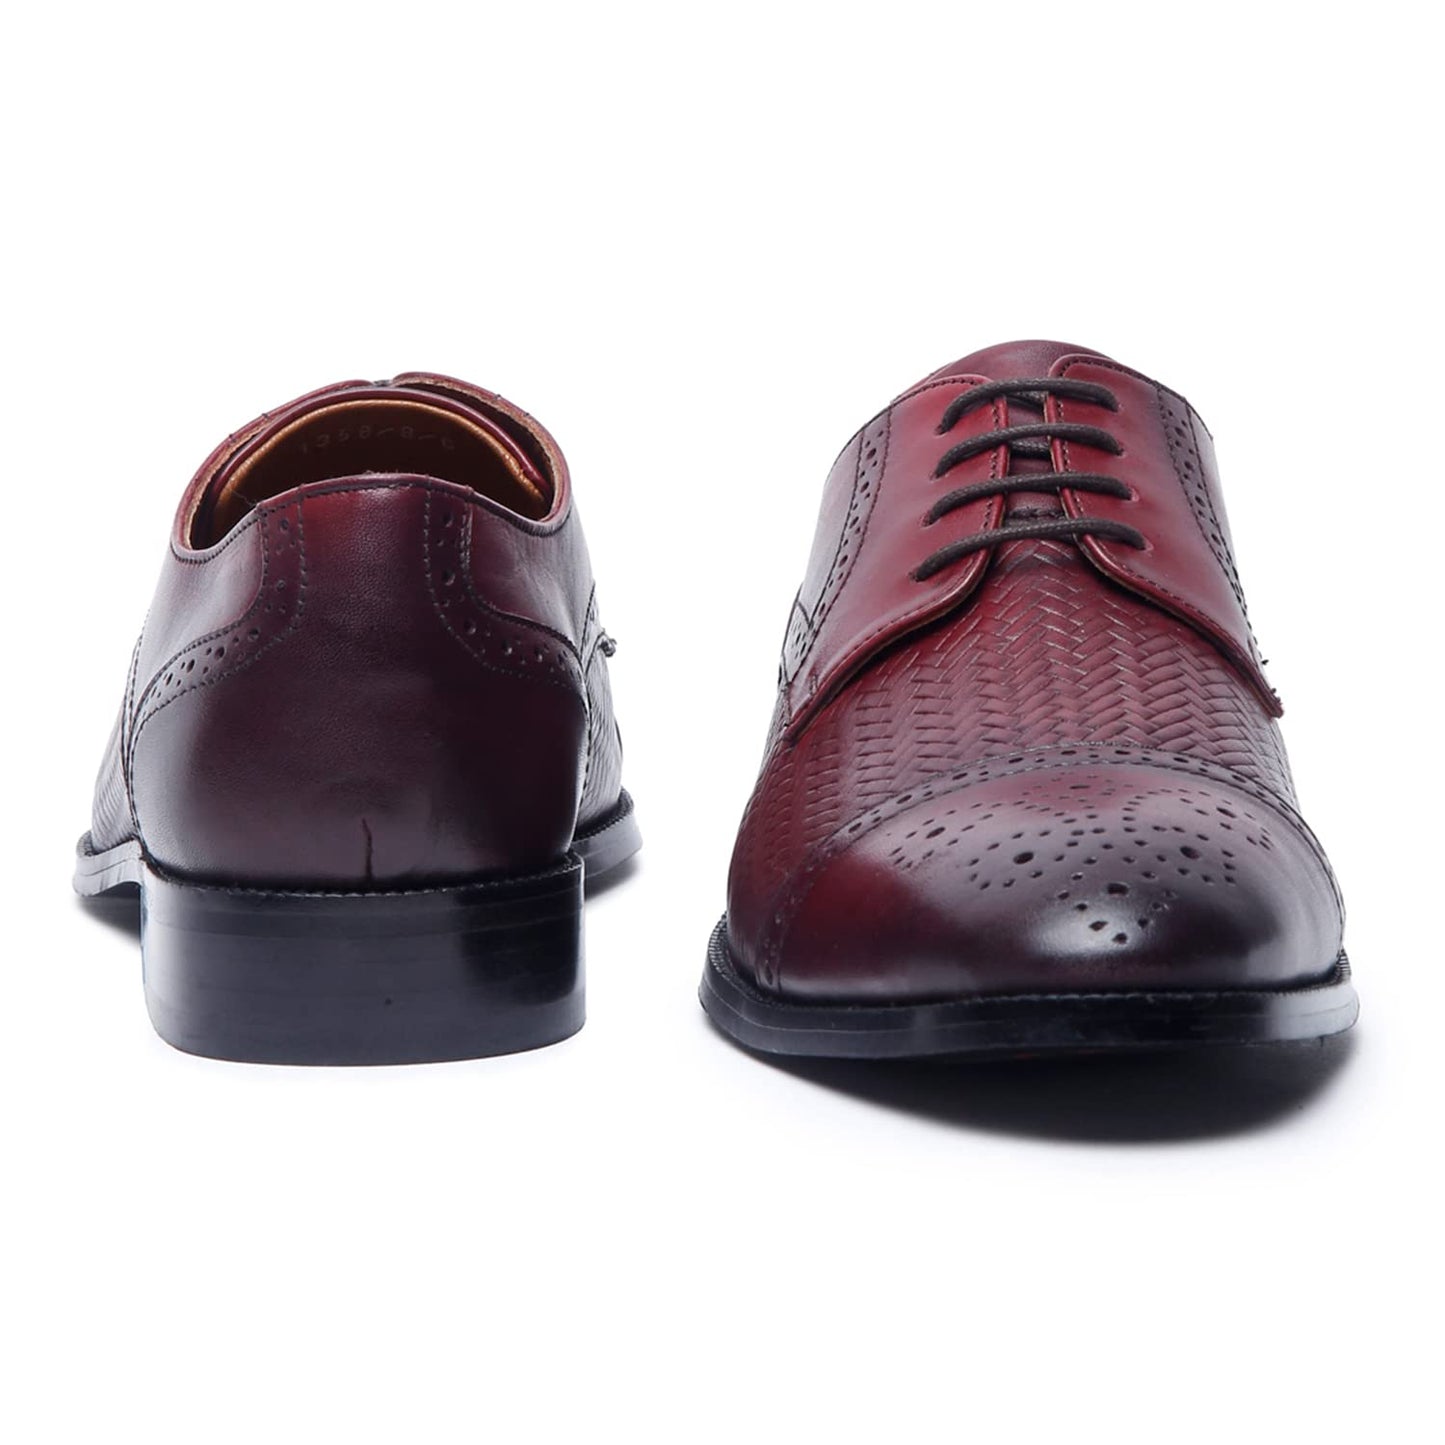 LOUIS STITCH Men's Rosewood Maroon Italian Leather Oxford Formal Shoes Handmade Stylish Slipon Shoes for Men (Britain WEOXRW) (Size- 9 UK)